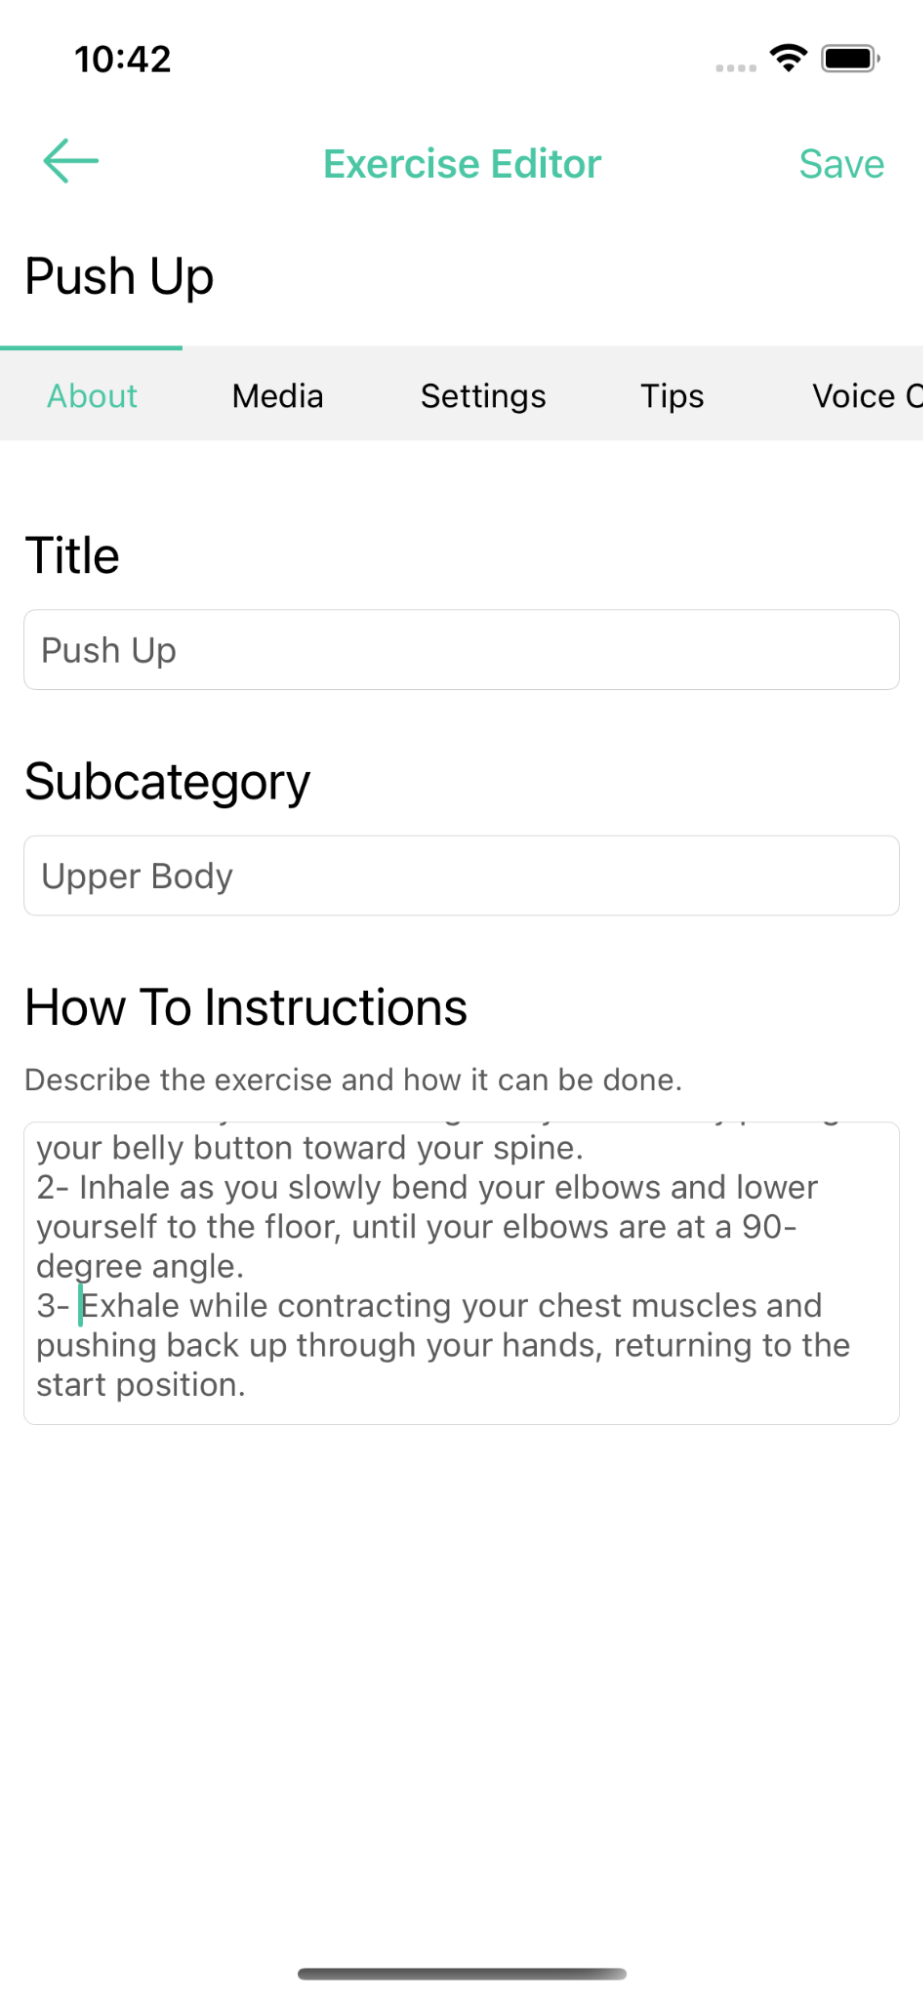 Custom exercise Title, subcategory and how to instructions